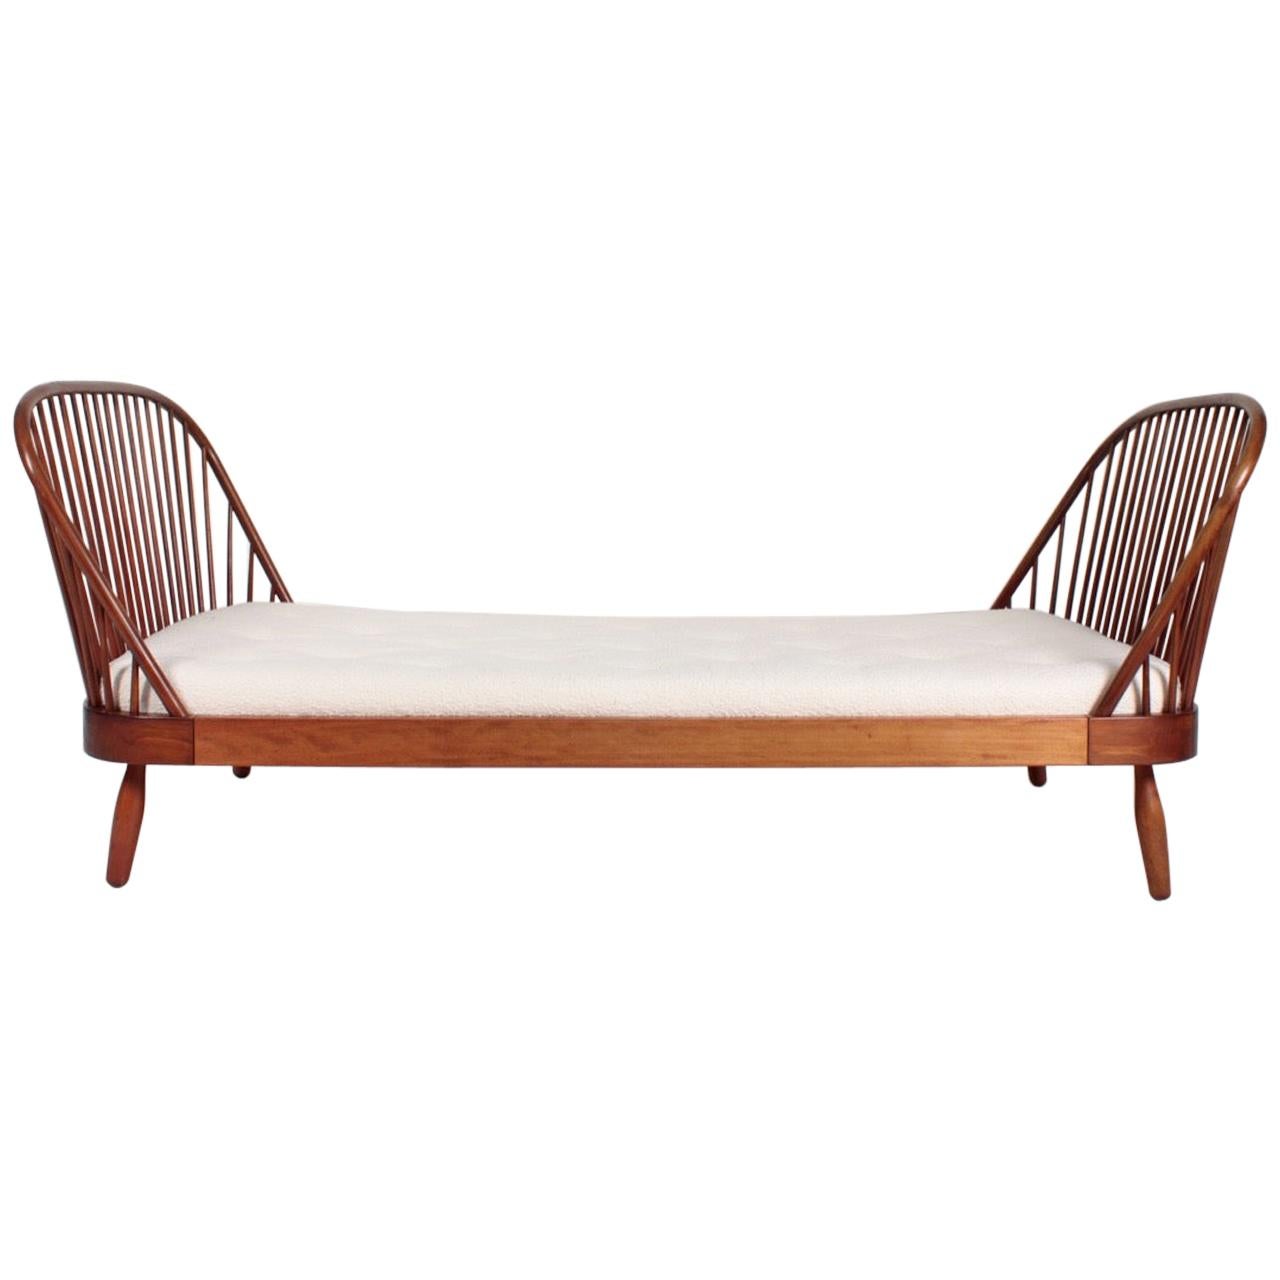 Midcentury Daybed with Boucle Mattress Designed by Frode Holm, 1940s